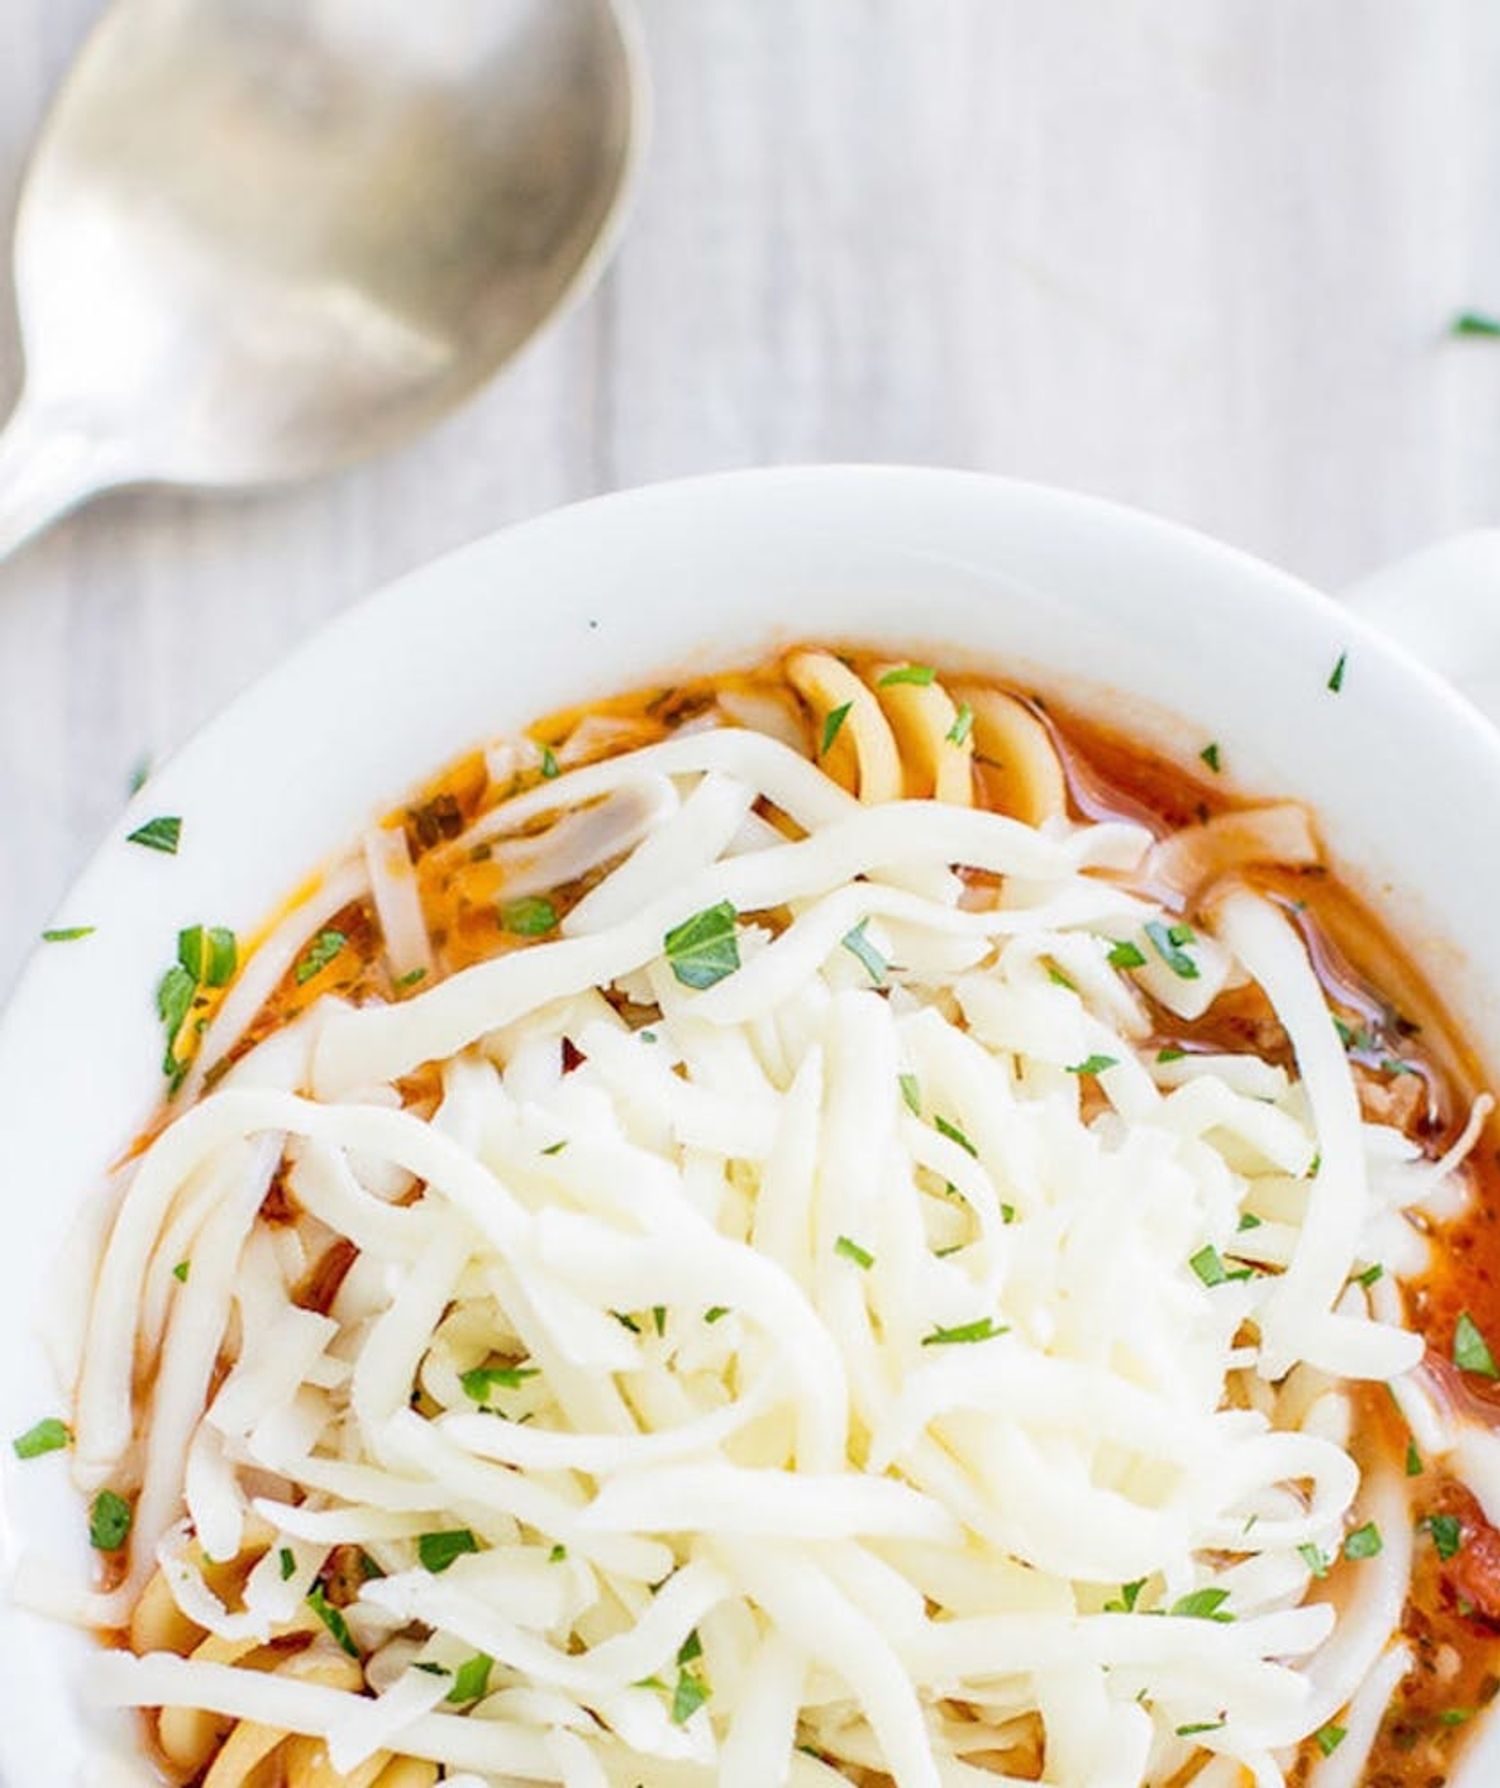 15 Slow Cooker Soup Recipes to Warm You Up - Brit + Co